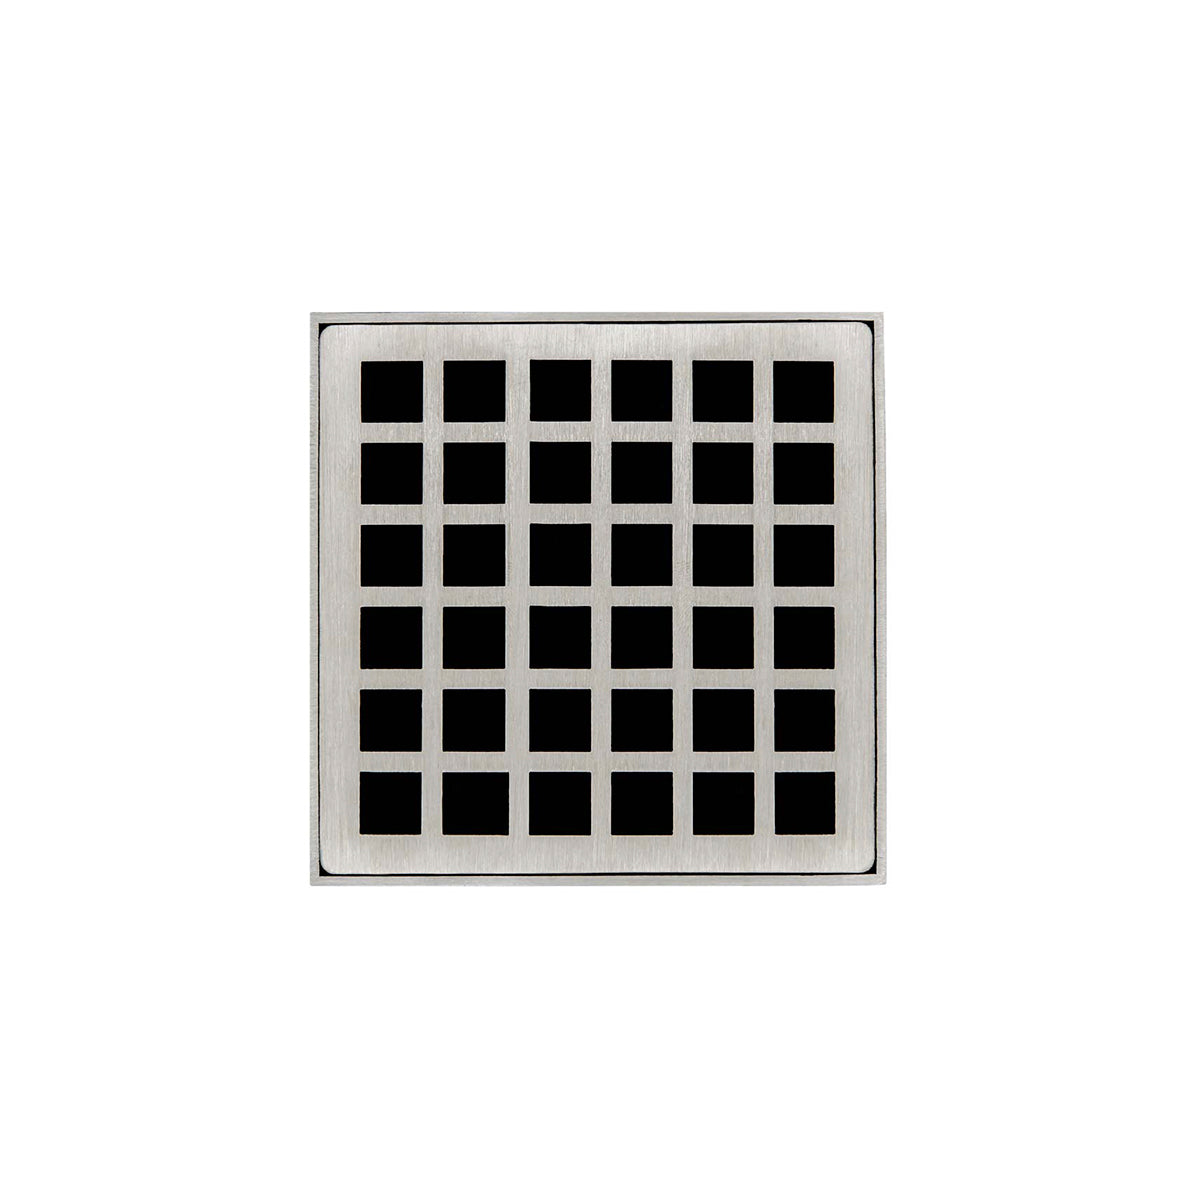 Infinity Drain 4" x 4" QDB 4 Premium Center Drain Kit with Squares Pattern Decorative Plate with PVC Bonded Flange Drain Body, 2", 3" and 4" Outlet